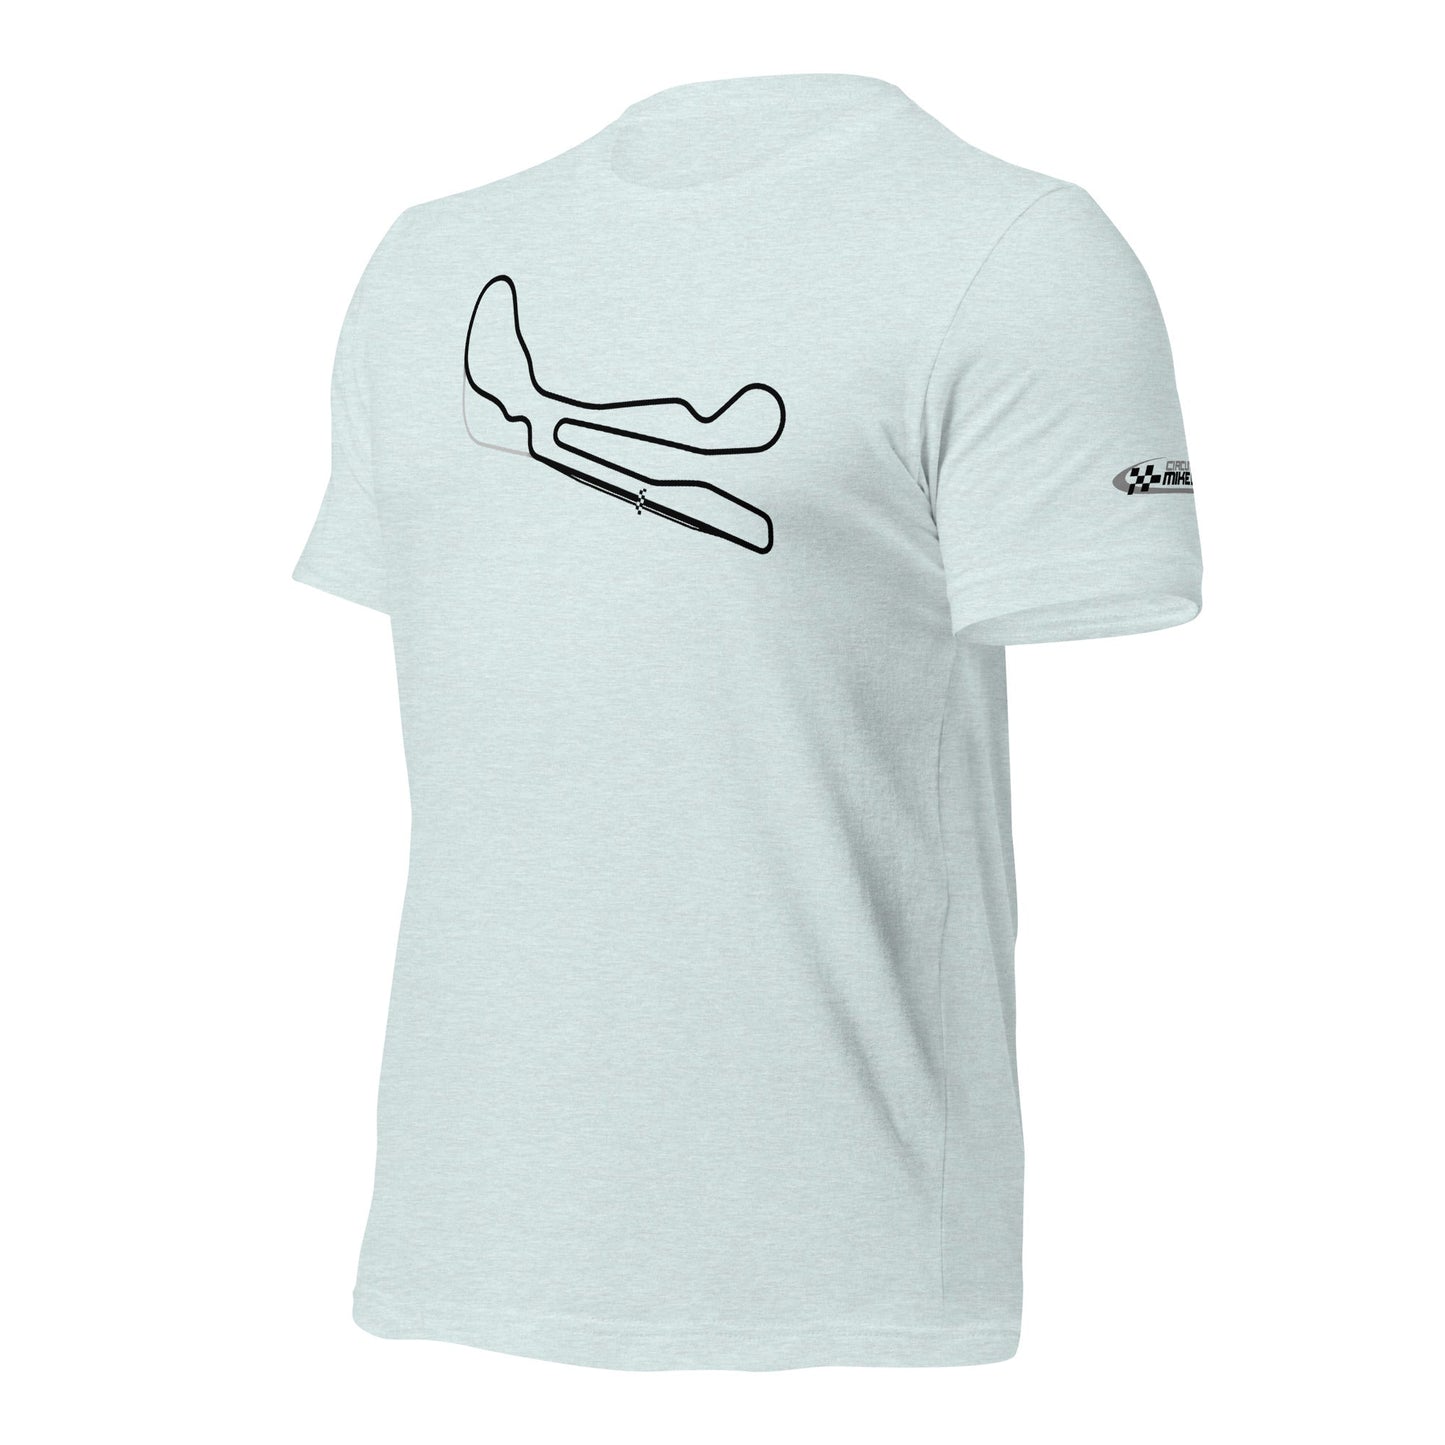 CIRCUITO MIKE G 100% cotton Tee - Track map - Mint Light Grey 7